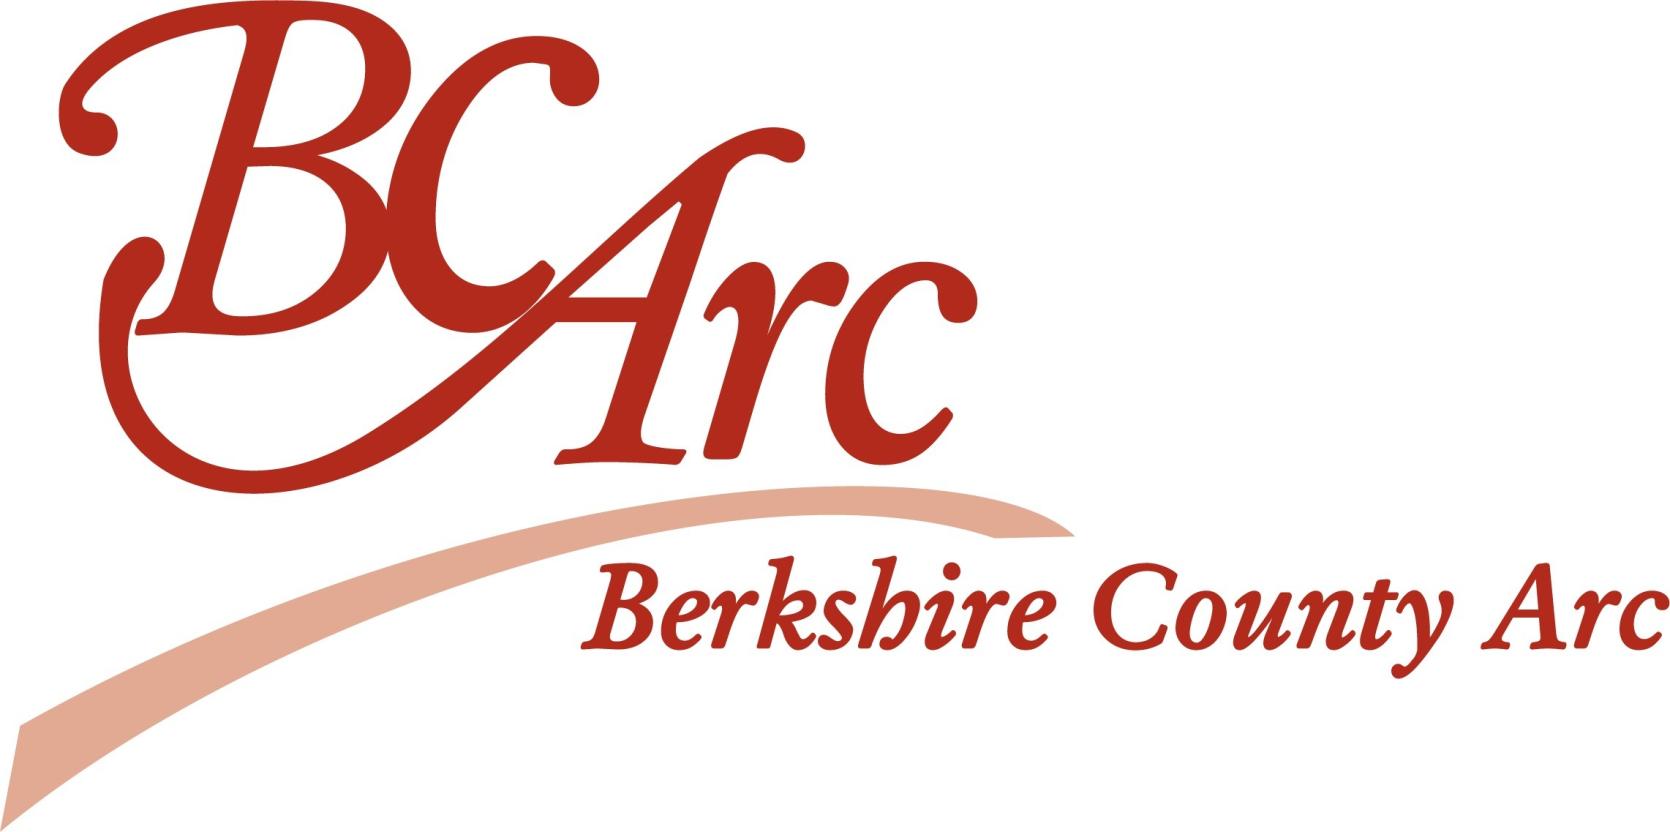 An image of the Berkshire County Arc logo.